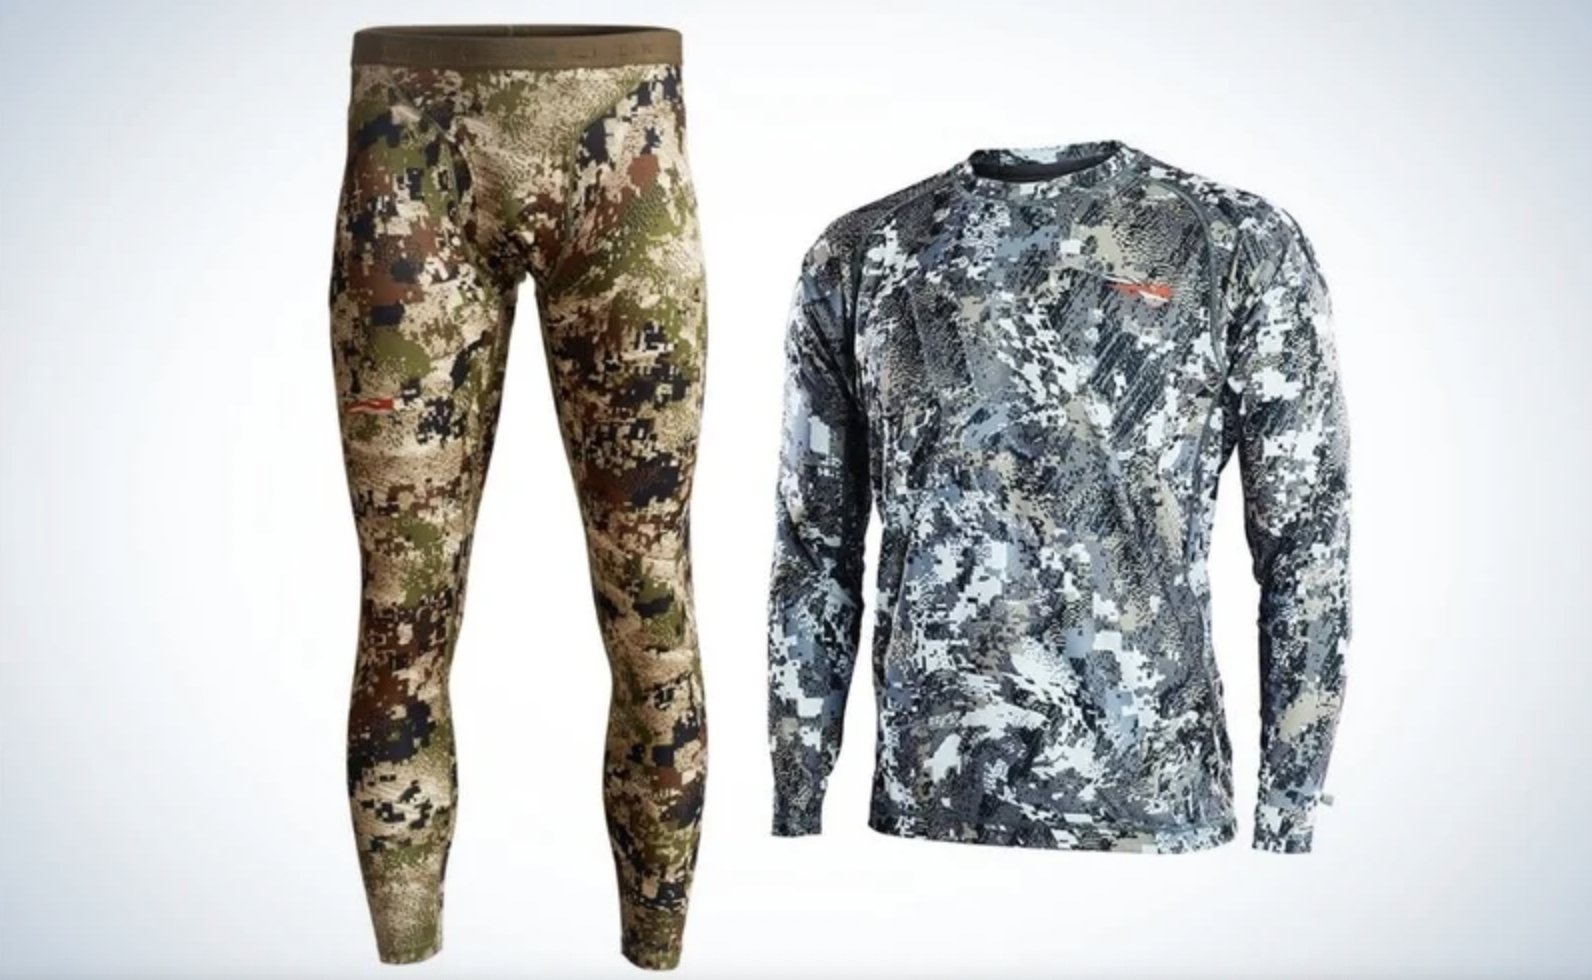 14 Great Pairs of Thermal Underwear That Promise All-day Warmth